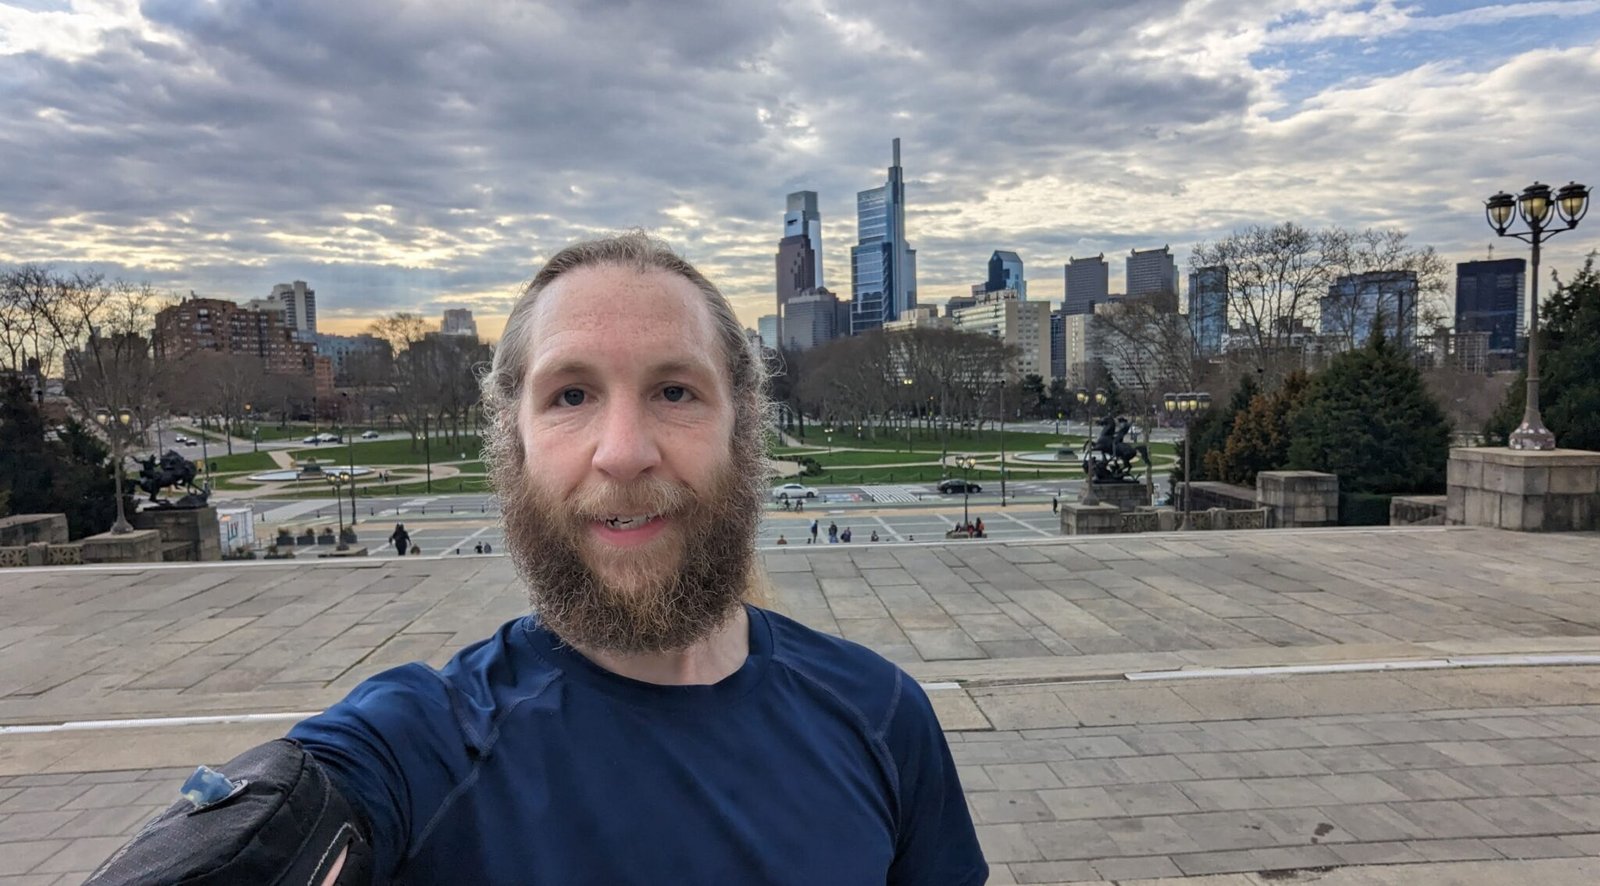 Me at the end of a 20 mile long run, training for the Jersey City Marathon. Taken at the top of the steps to the Philly art museum, with the city skyline in the background.